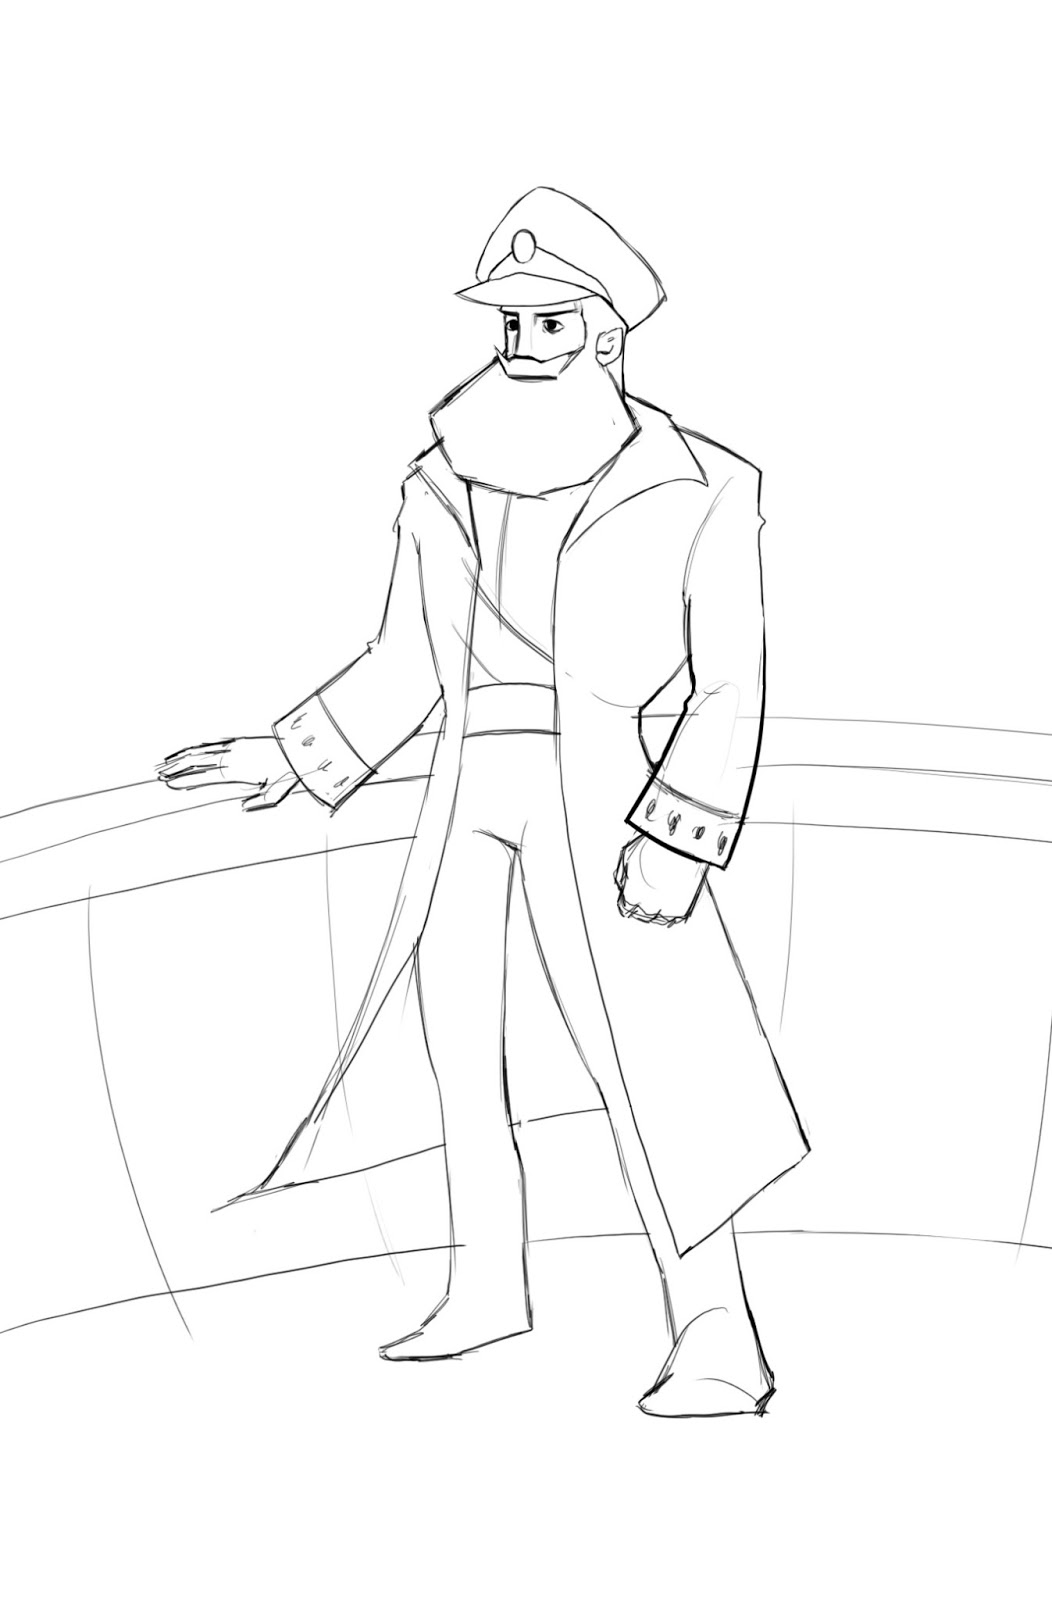 Drawing For Animation: Sea Captain - Younhee